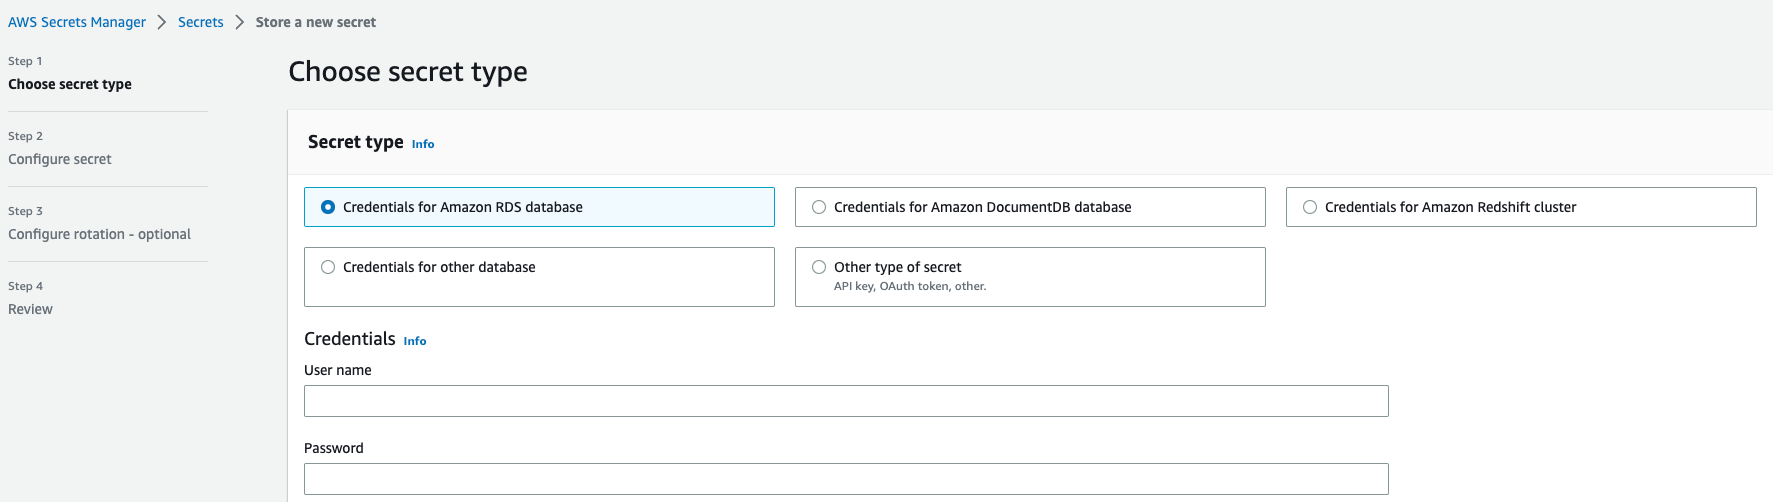 CloudTruth and AWS Secrets Manager 2